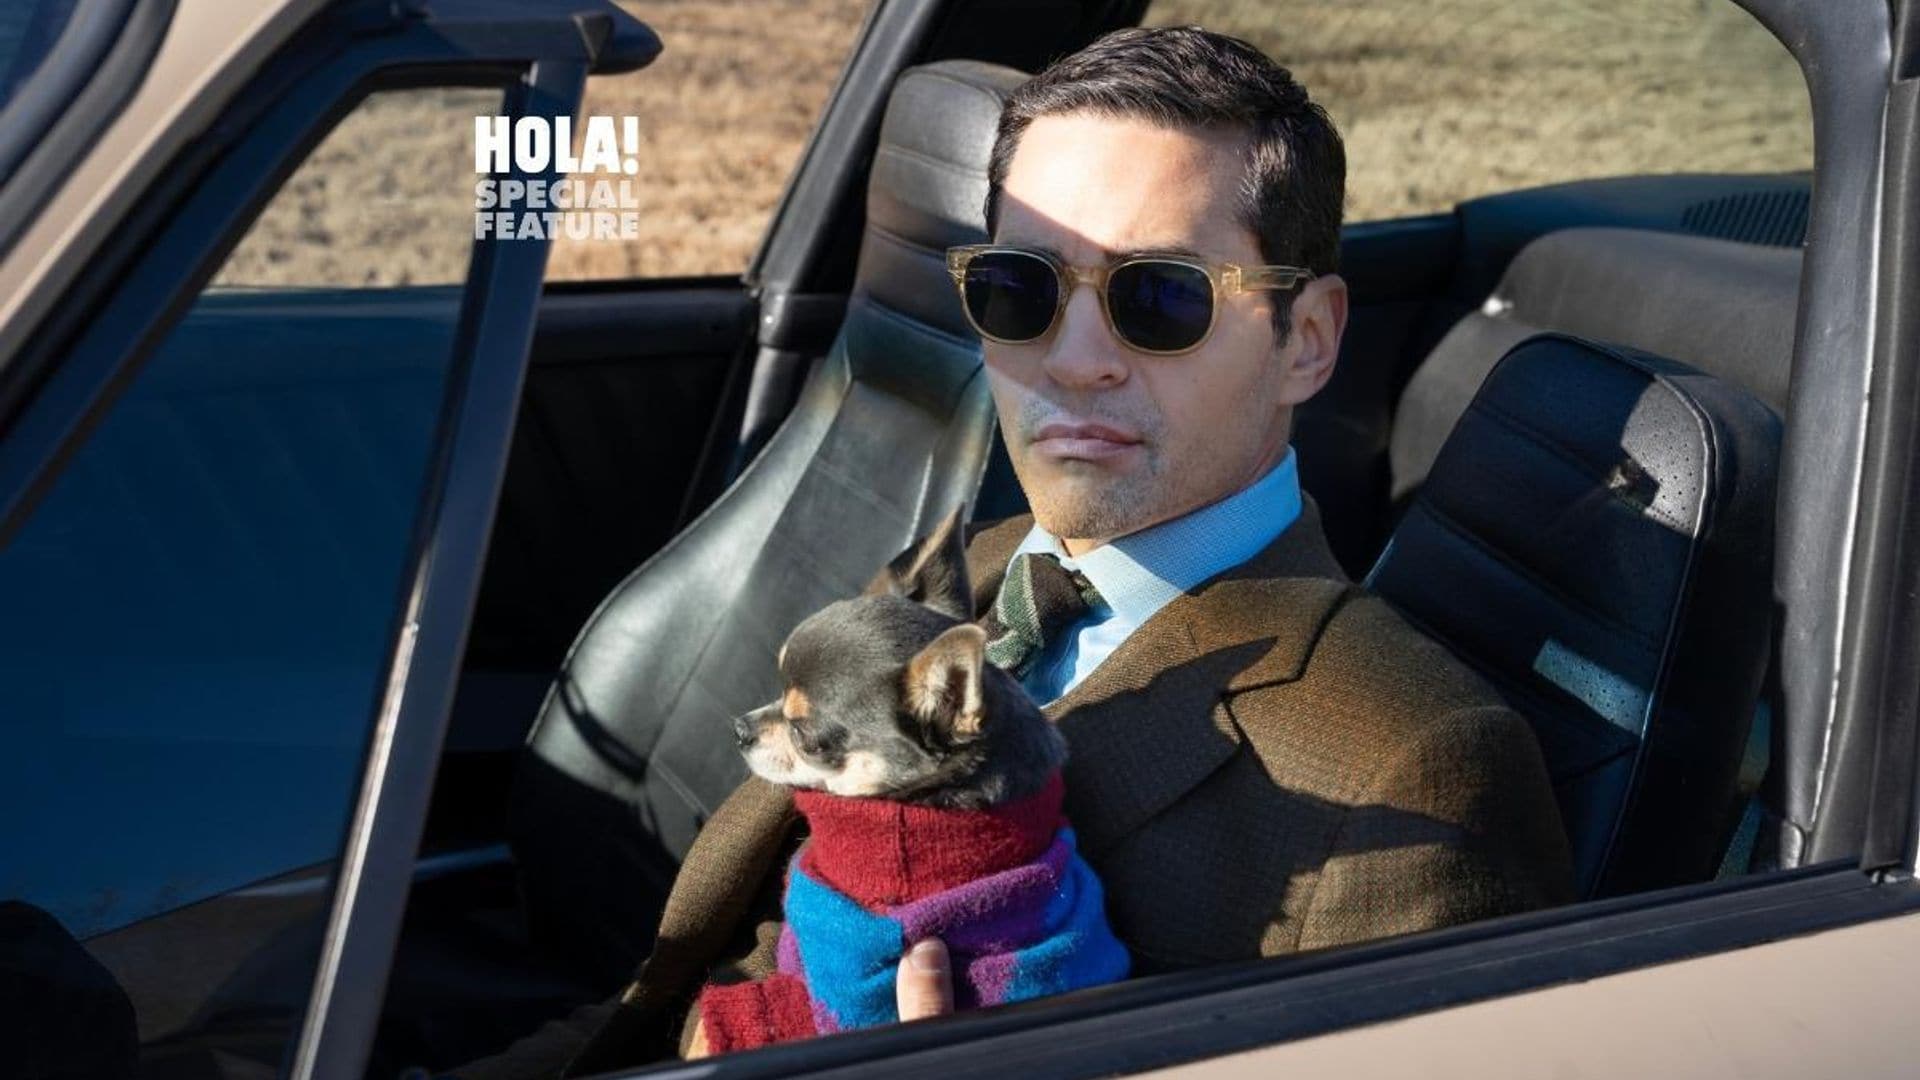 Ramon Rodriguez on ‘Will Trent’s underdog story and bonding with Betty, the Chihuahua